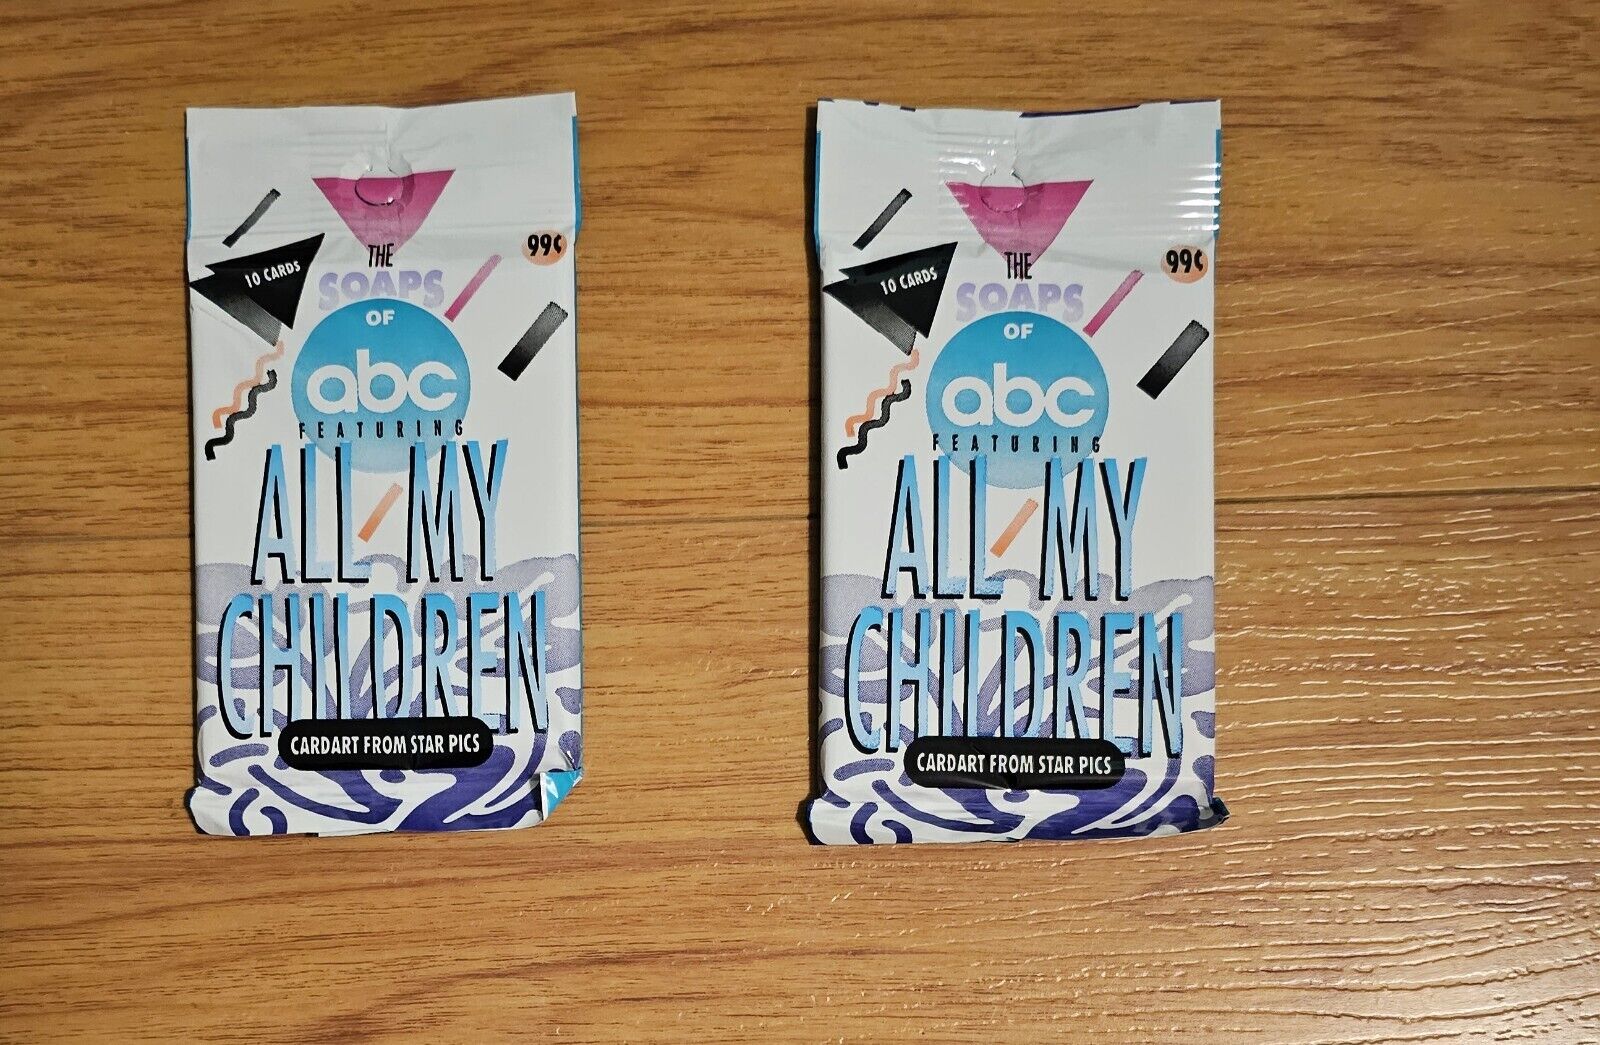 The Soaps Of ABC, Ft. All My Children, 1991 Trading Cards (2 Packs Sealed)